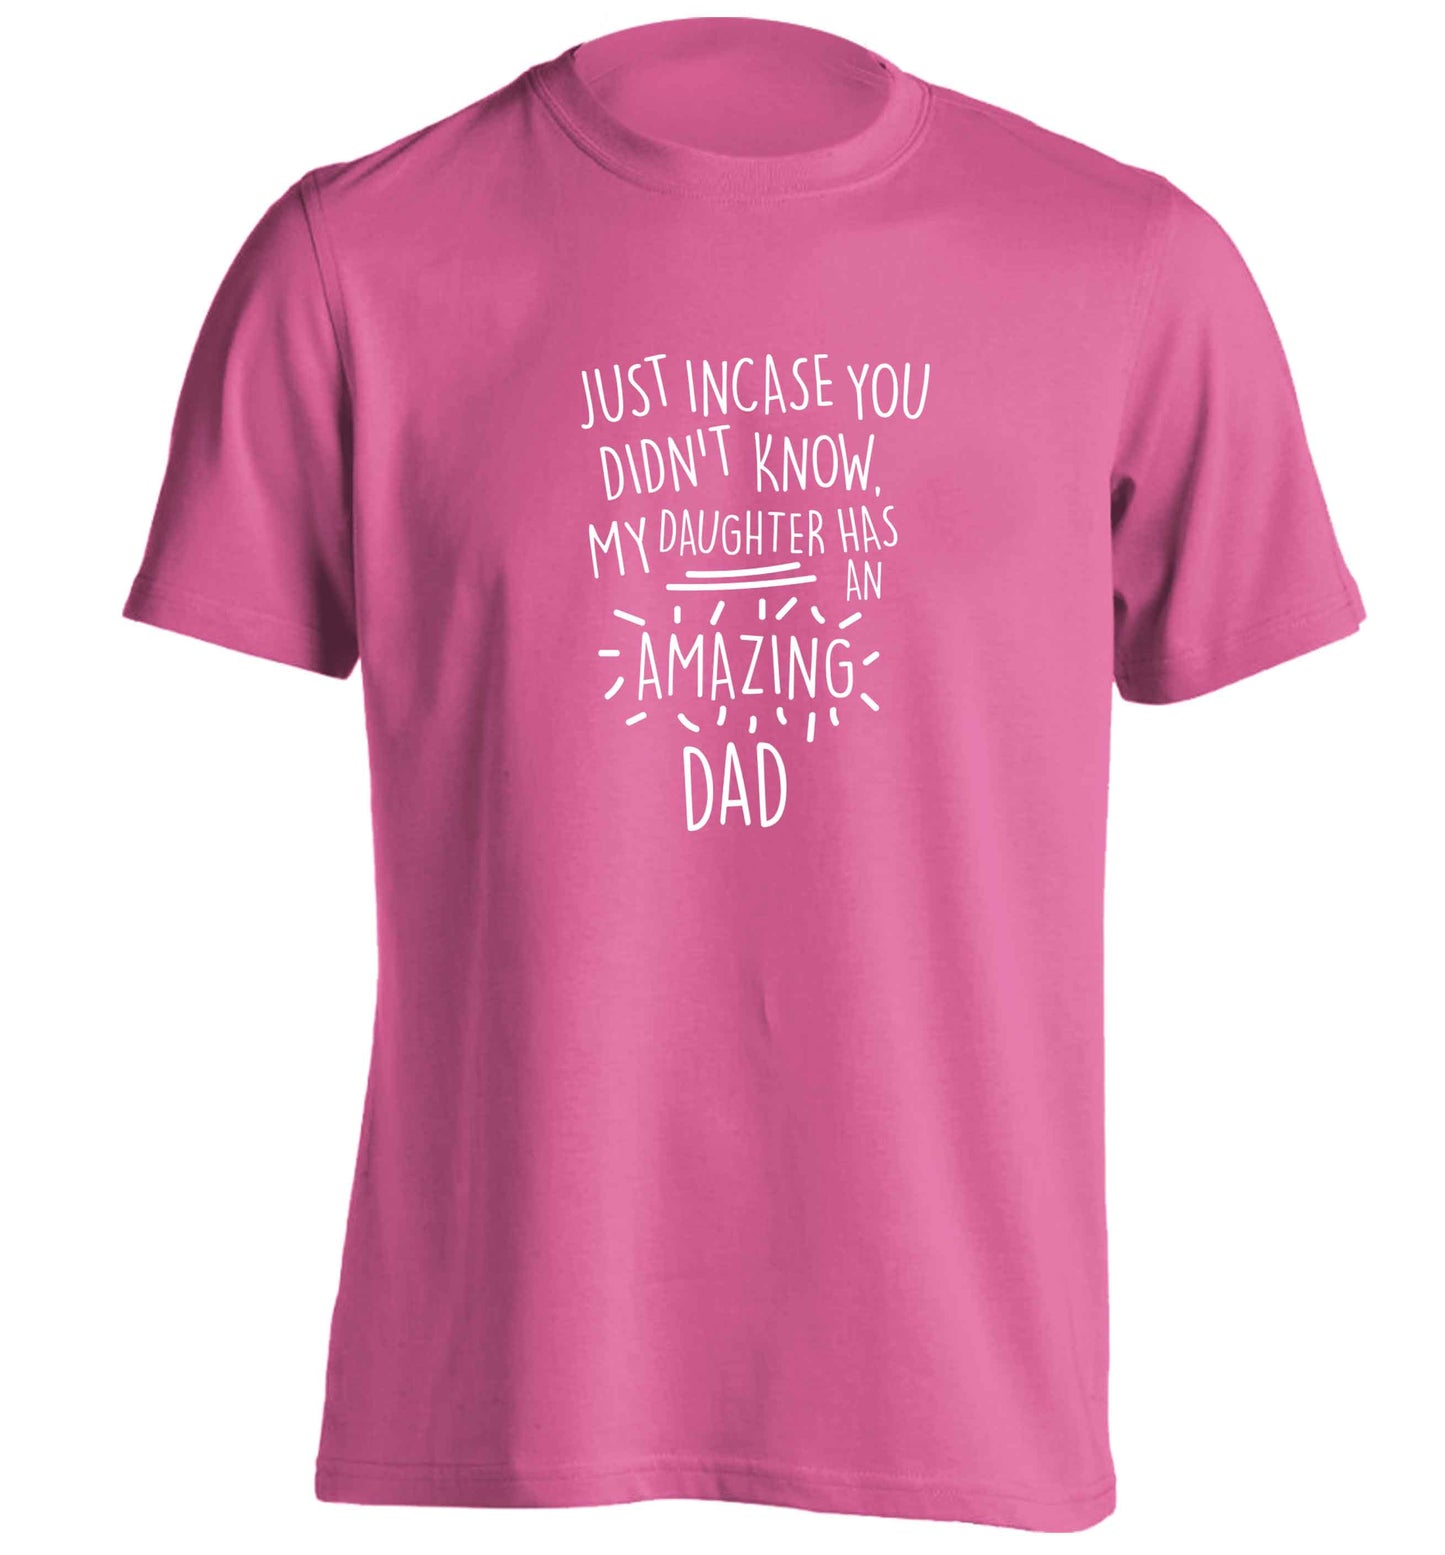 Just incase you didn't know my daughter has an amazing dad adults unisex pink Tshirt 2XL